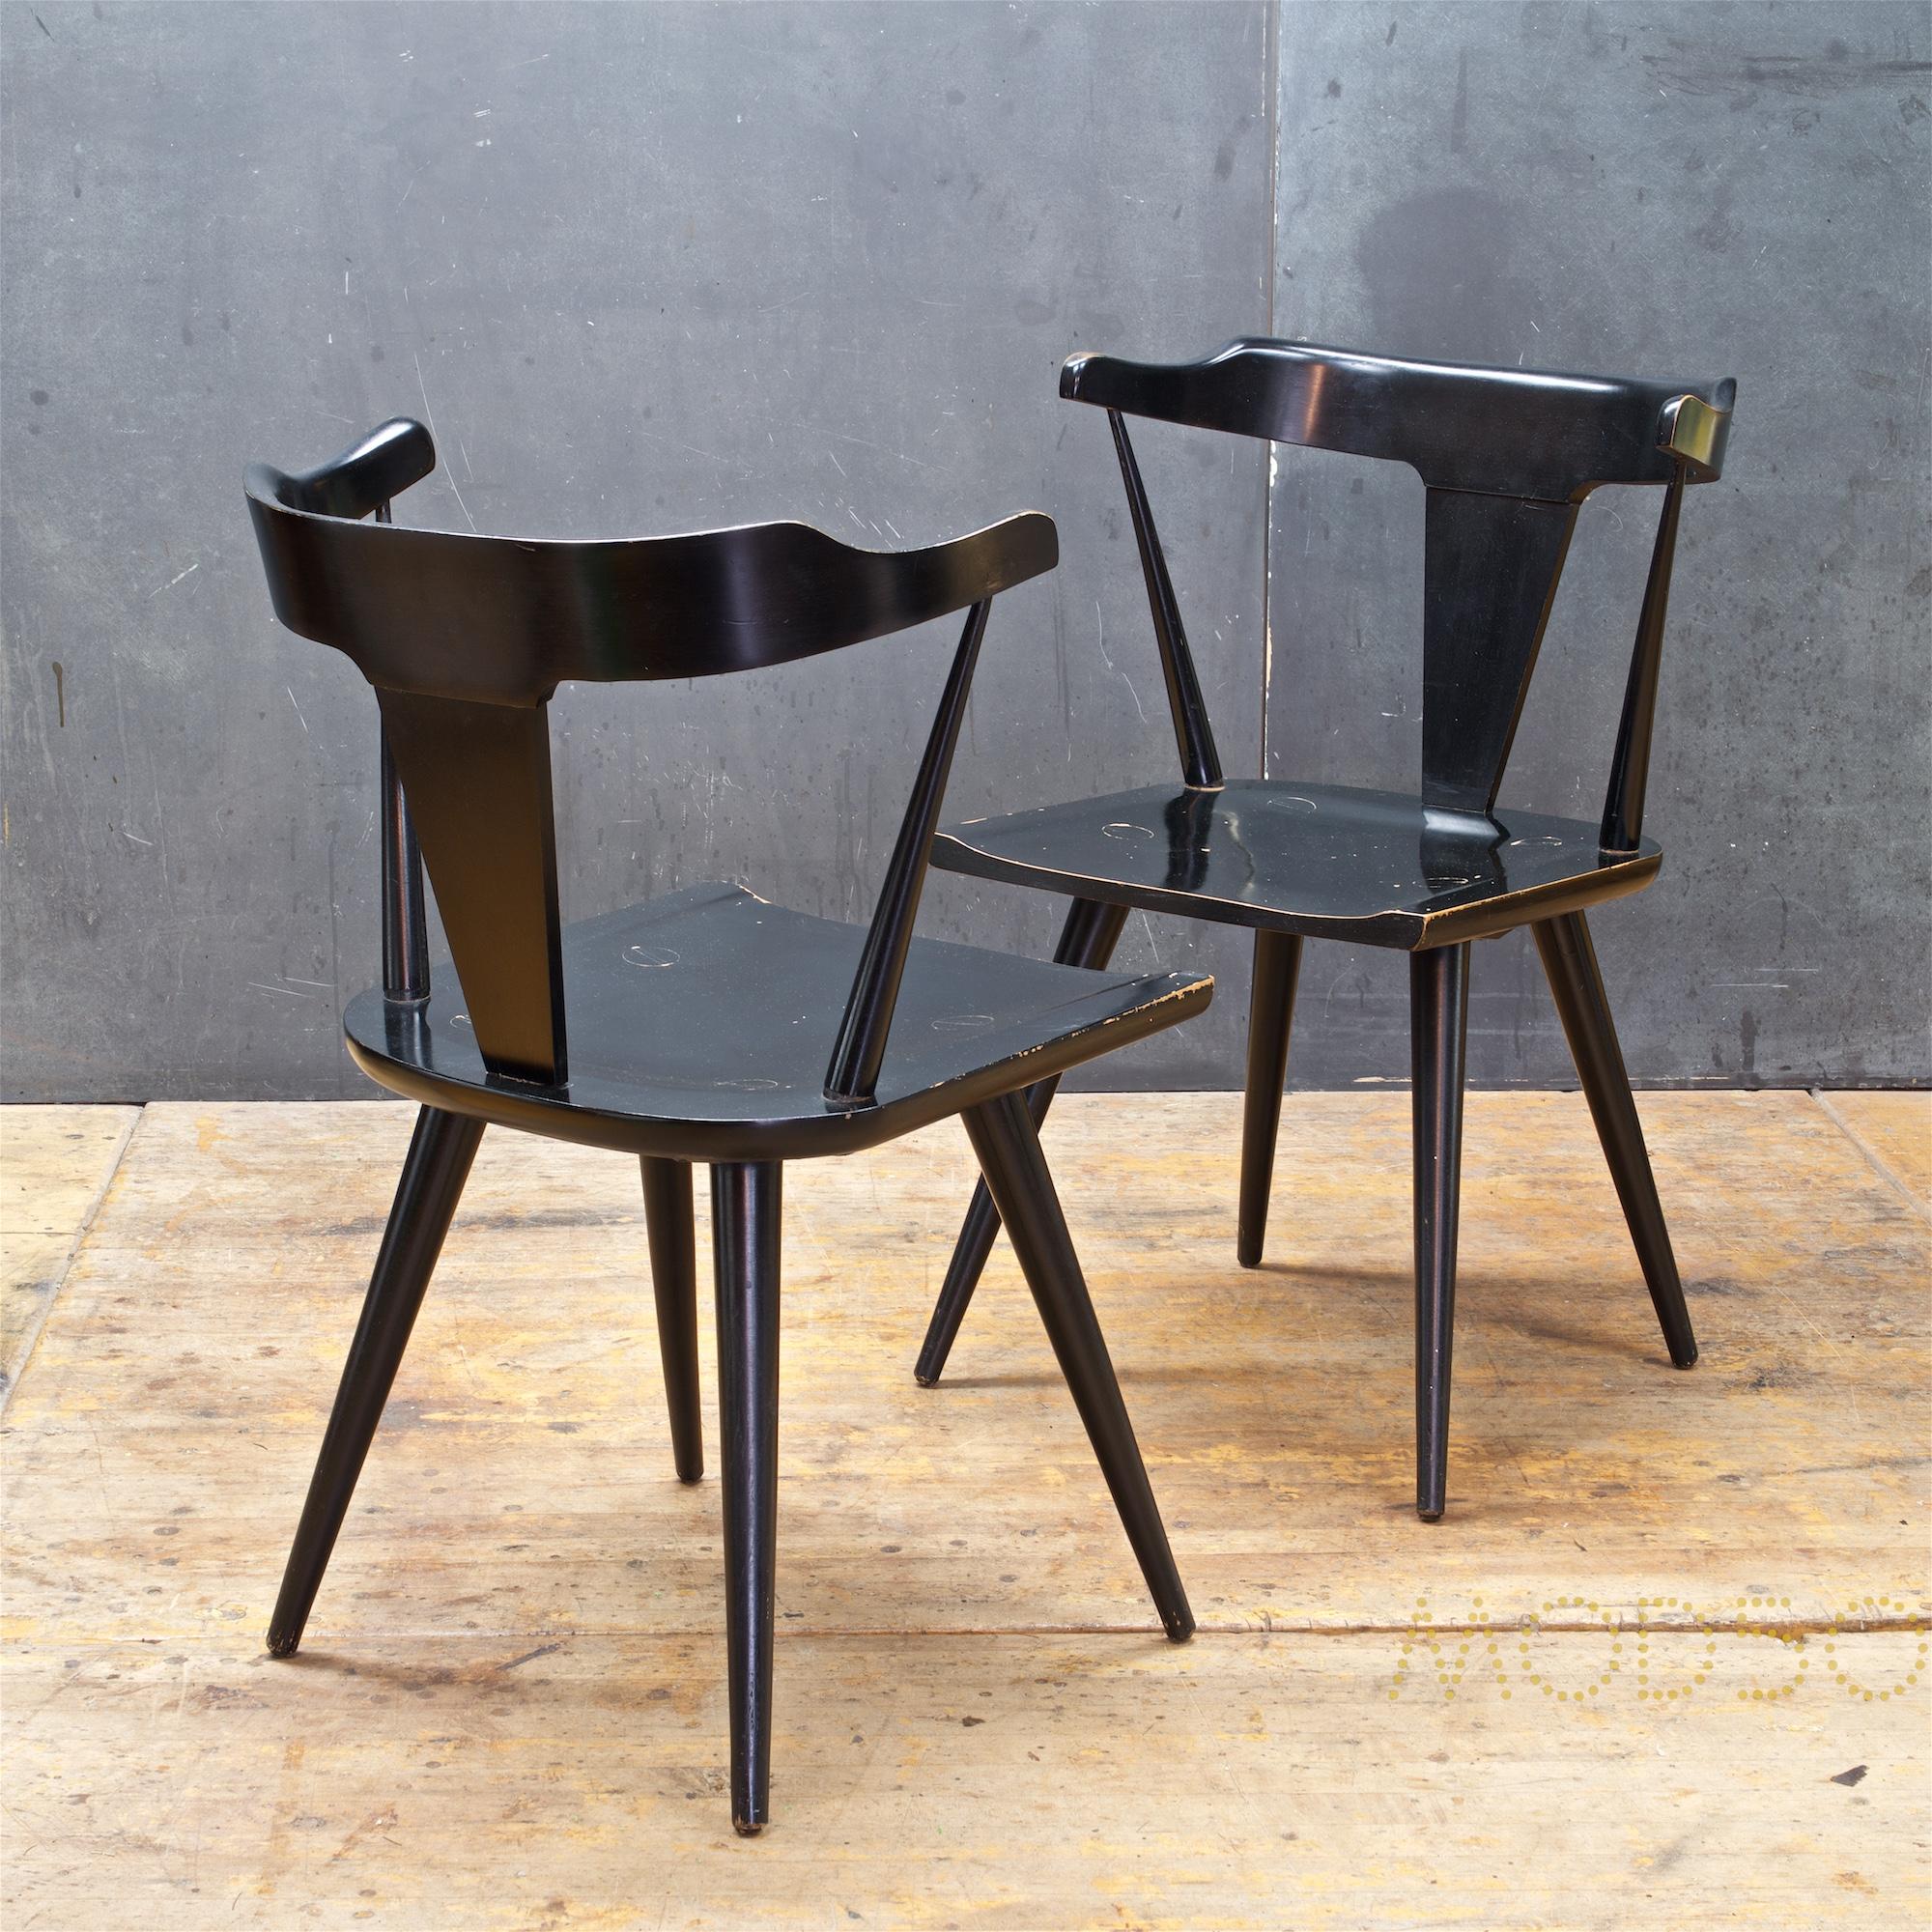 A pair of Paul McCobb Planner Group dining armchairs model Nº1530 in original black enamel finish with labels to verso of each chair. Lots of paint loss in the seat areas, otherwise tight and usable.